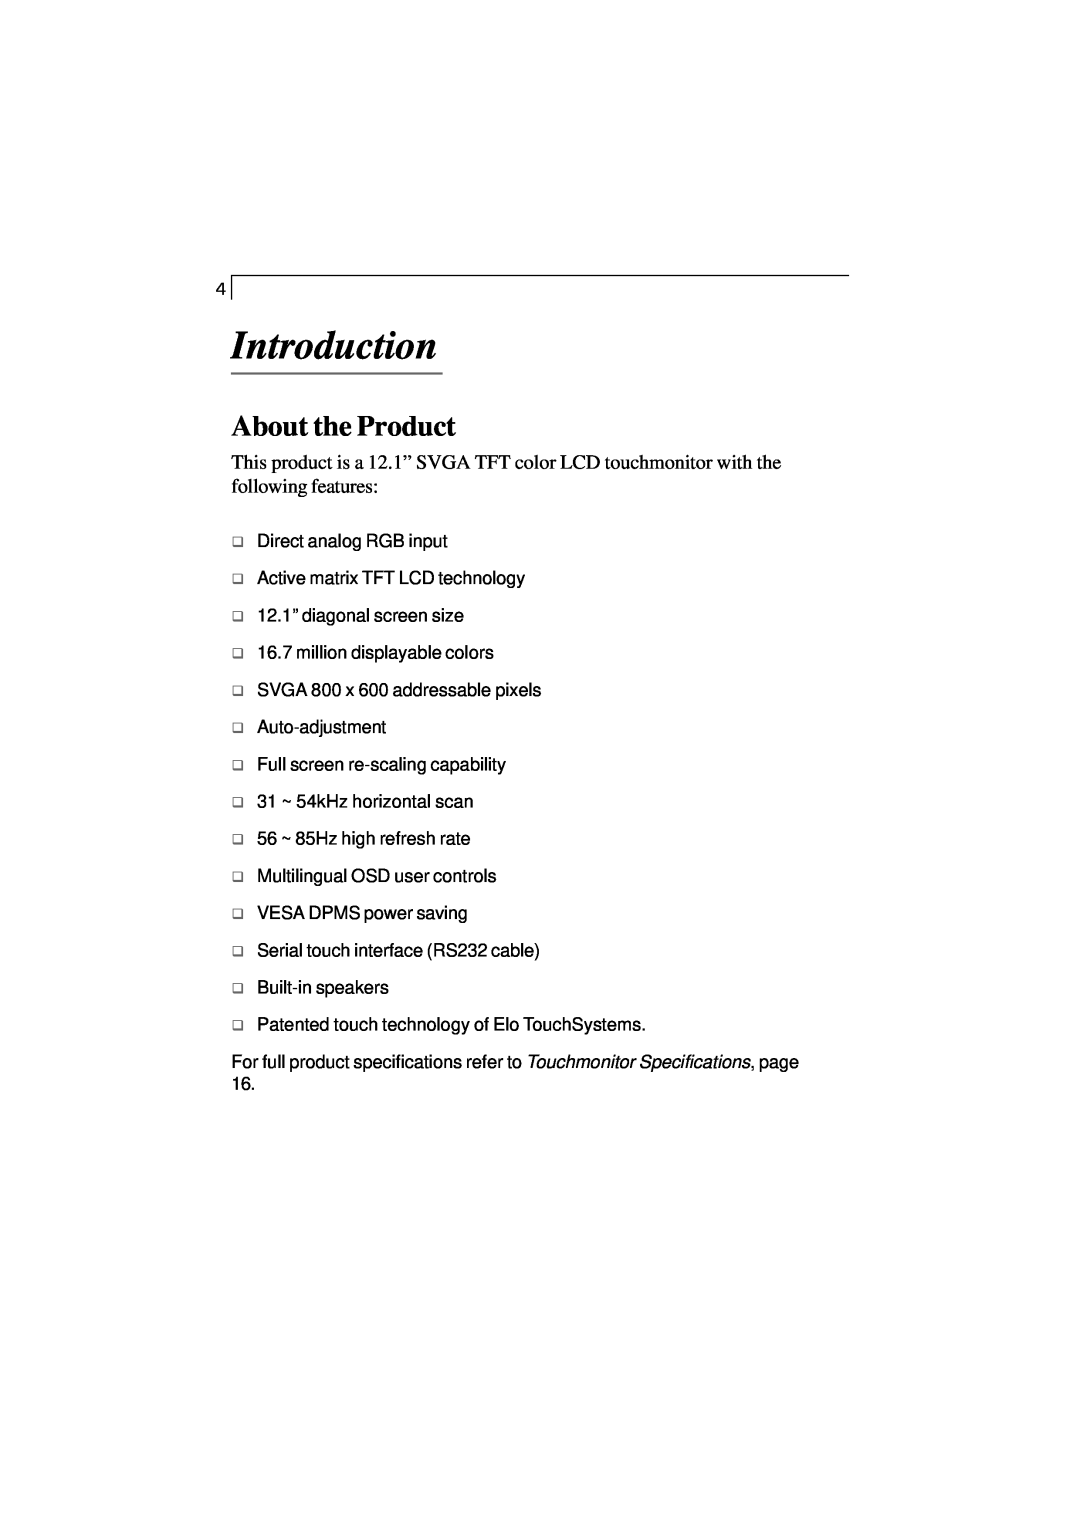 Elo TouchSystems 1225L, 1228L manual Introduction, About the Product 